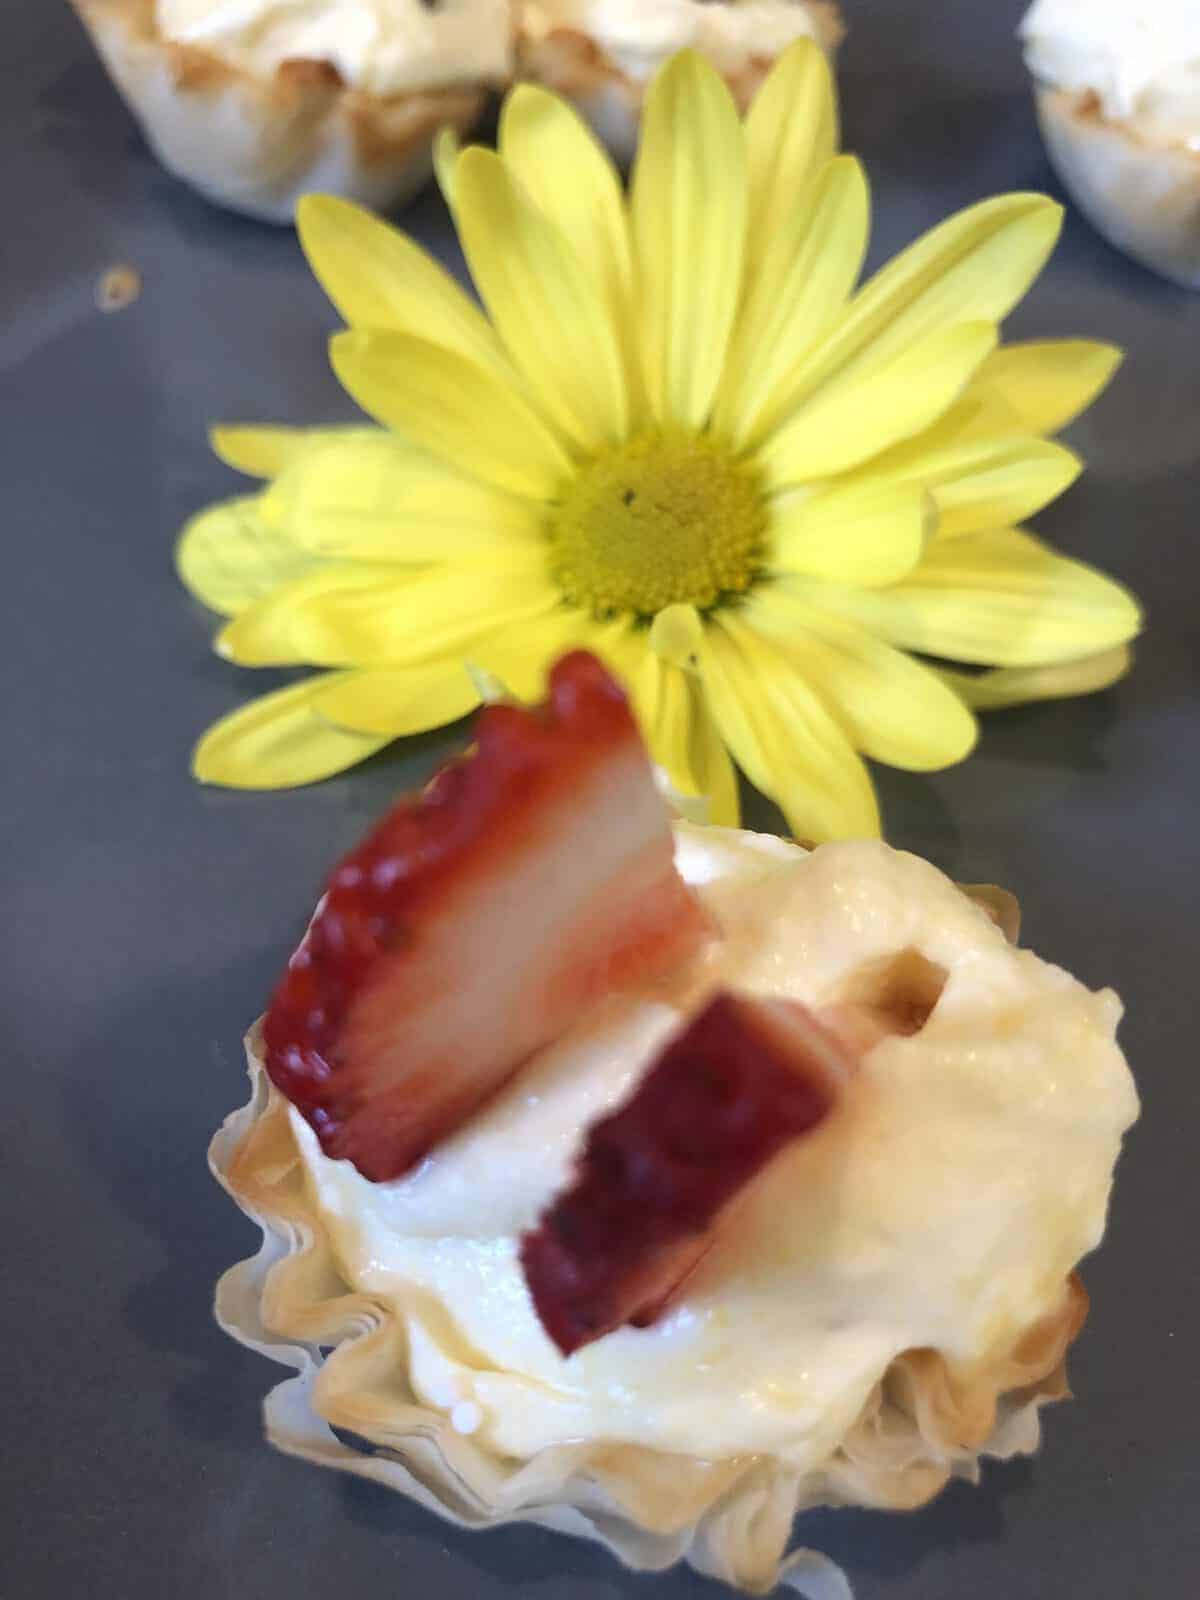 Lemon Zesty tartlet Topped with Sliced Strawberry and a yellow flower